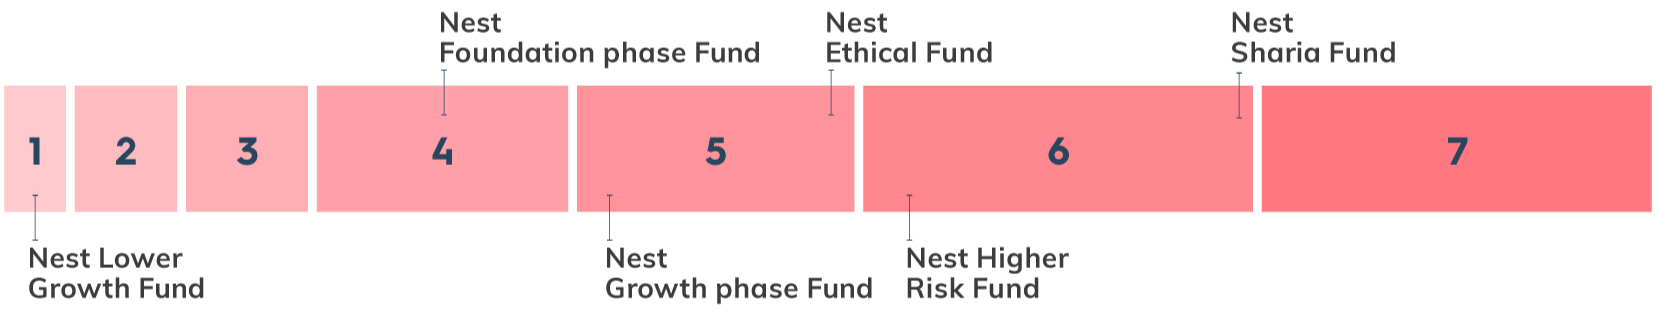 Graphic showing investment risk profiles